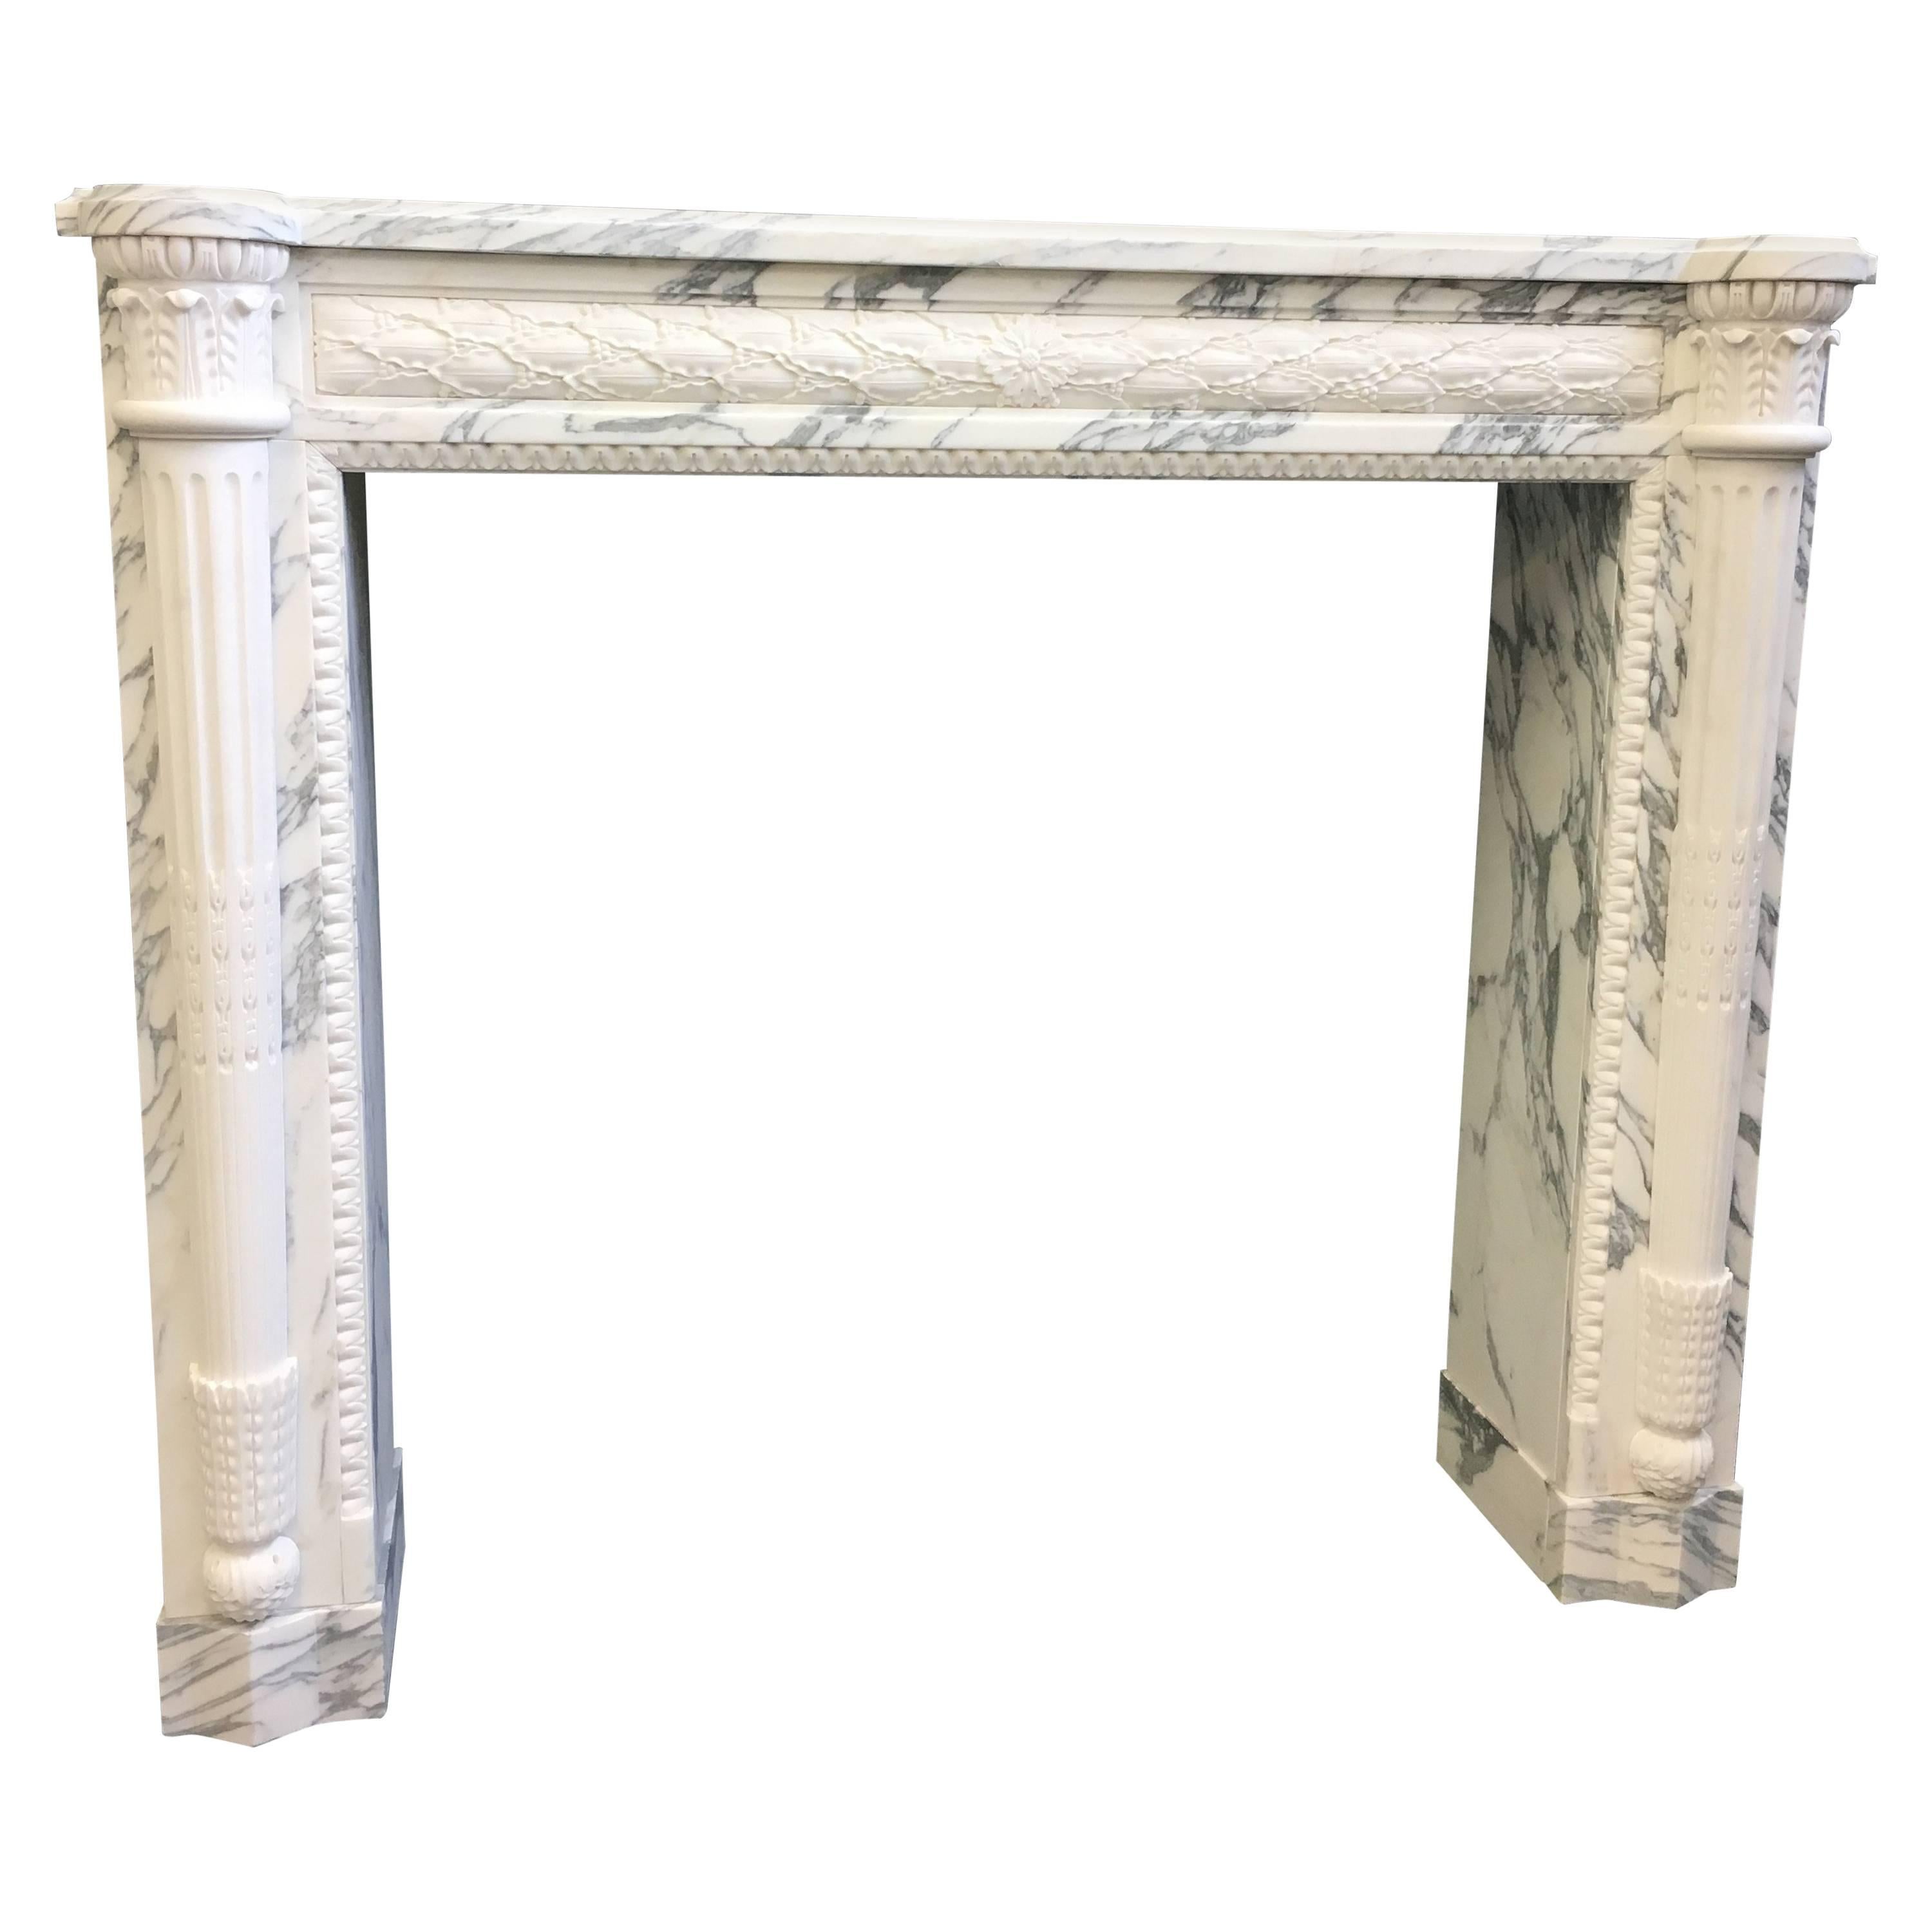 Louis XVI Style Chimneypiece in Fine Breche and Statuary Marbles